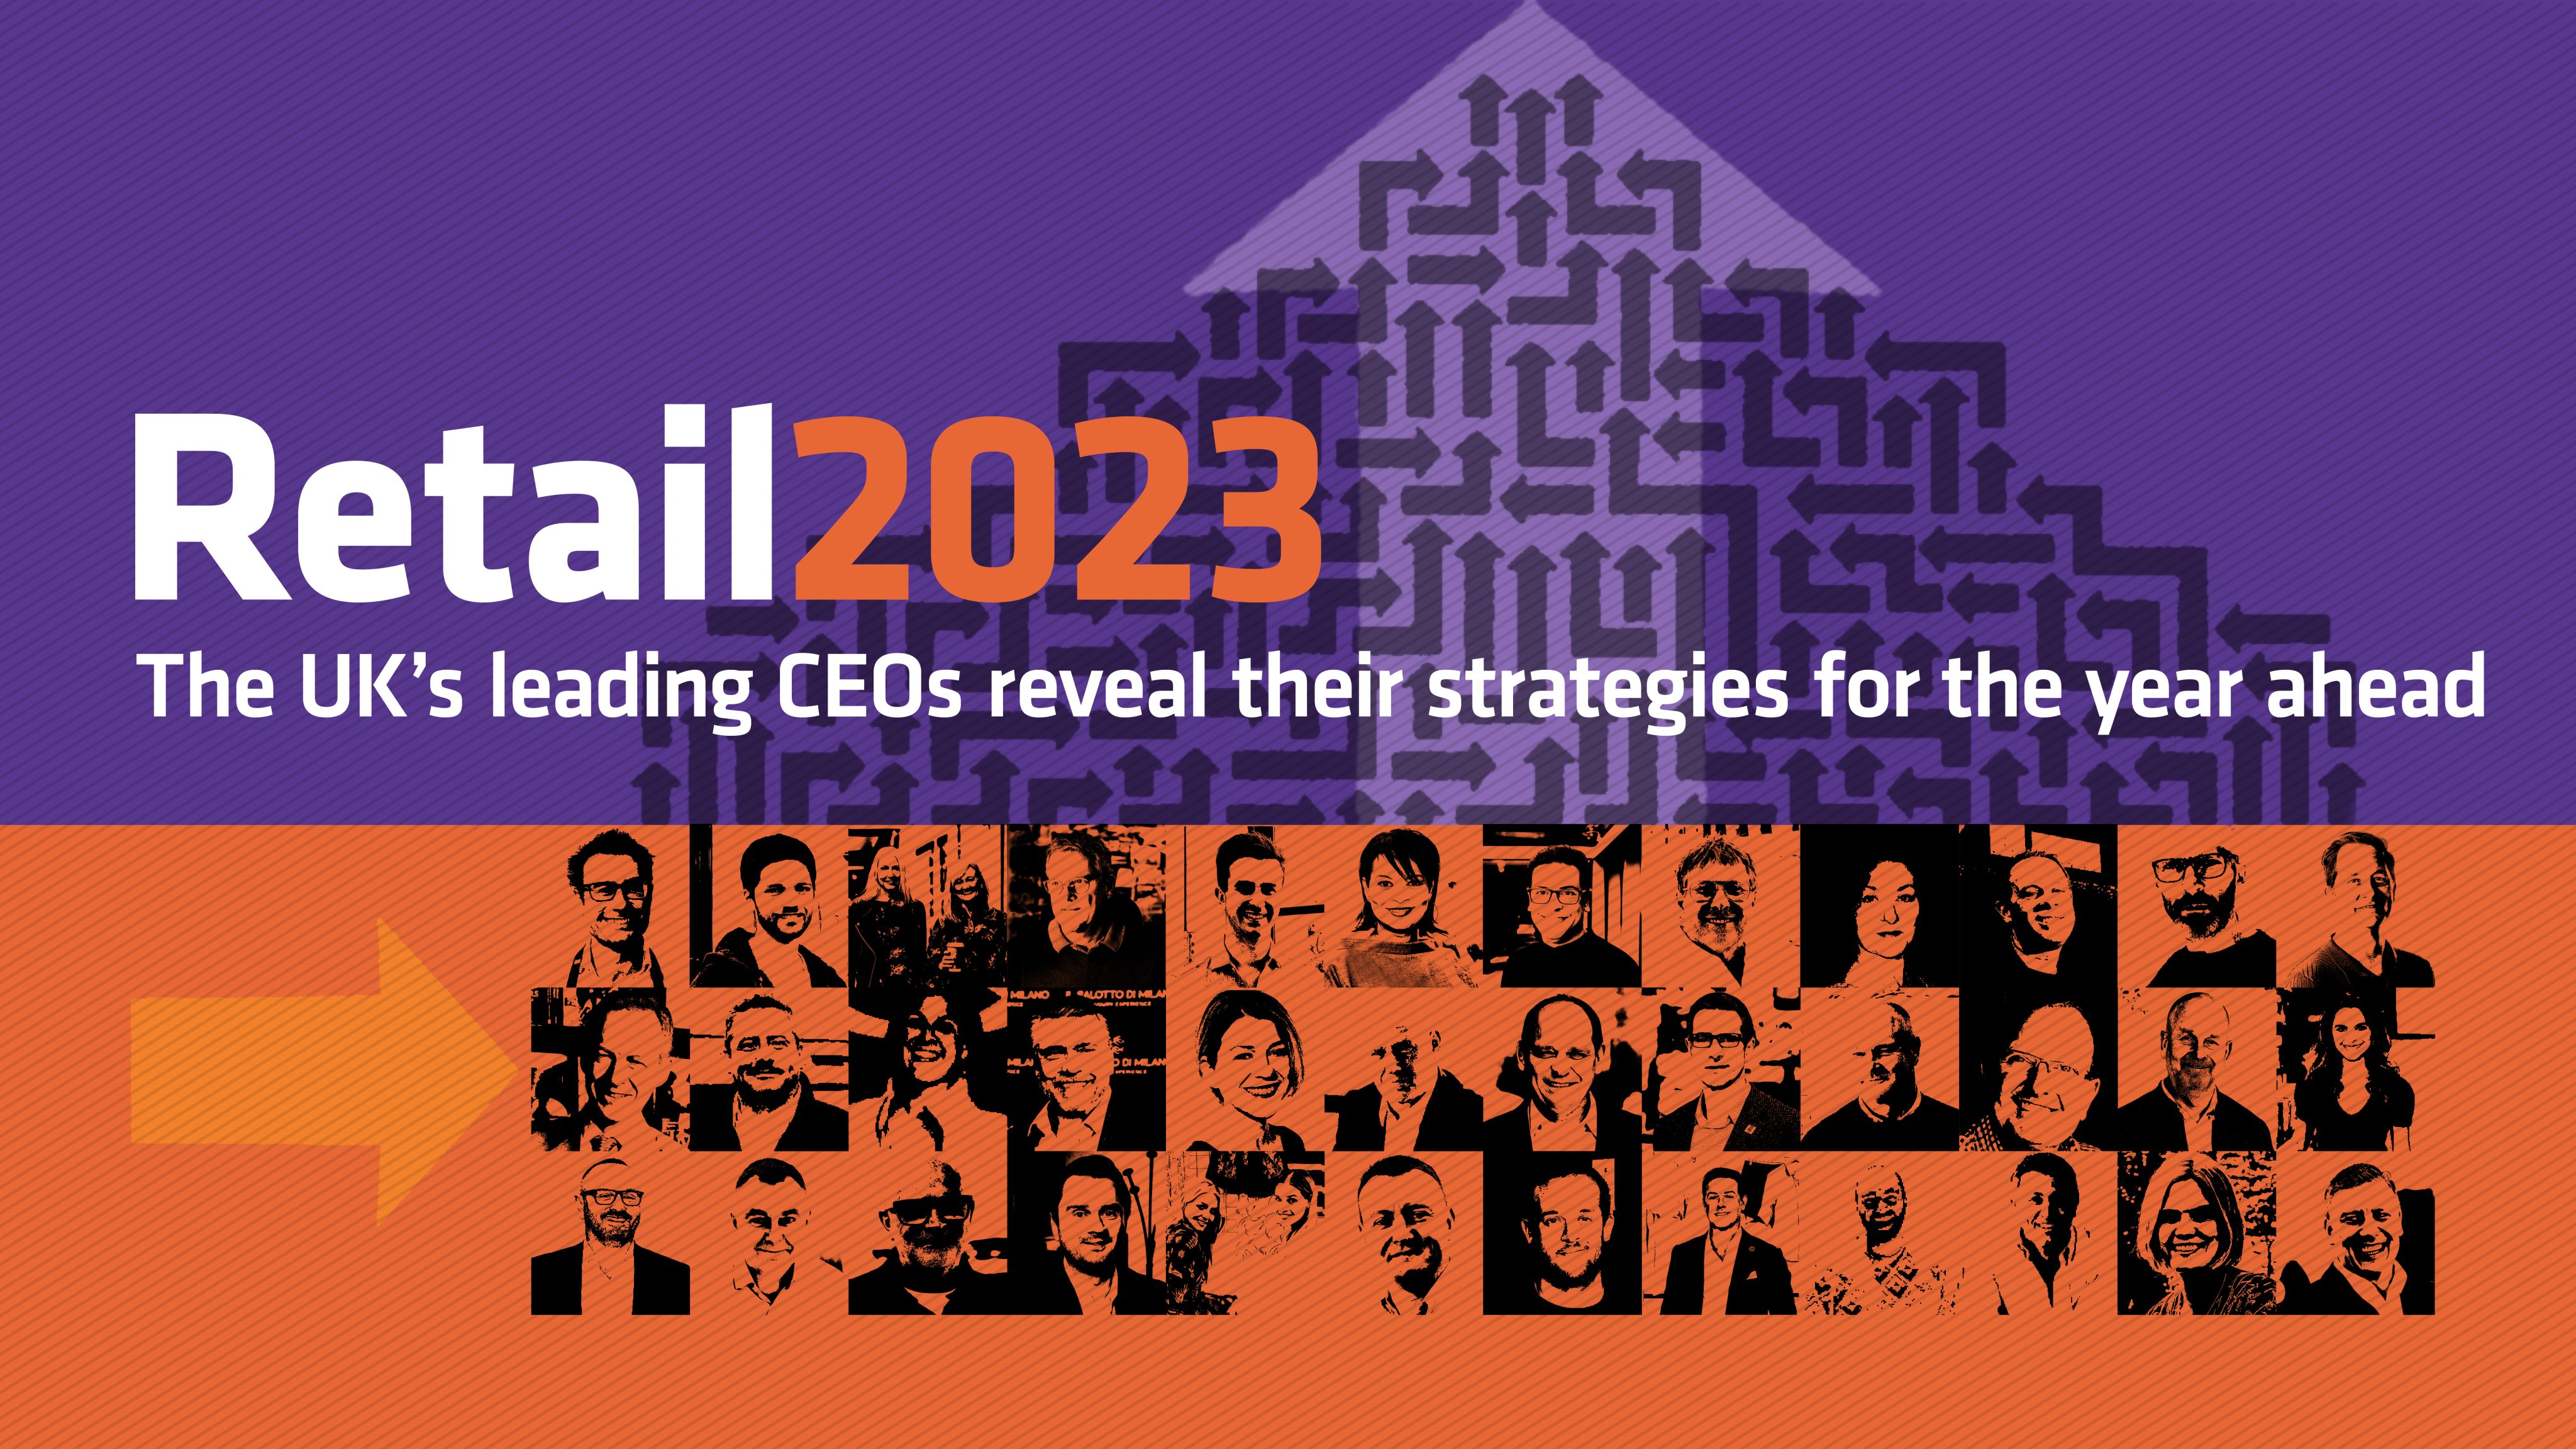 Collage image of retailers with text saying: Retail 2023: The UK's leading CEOs reveal their strategy for the year ahead